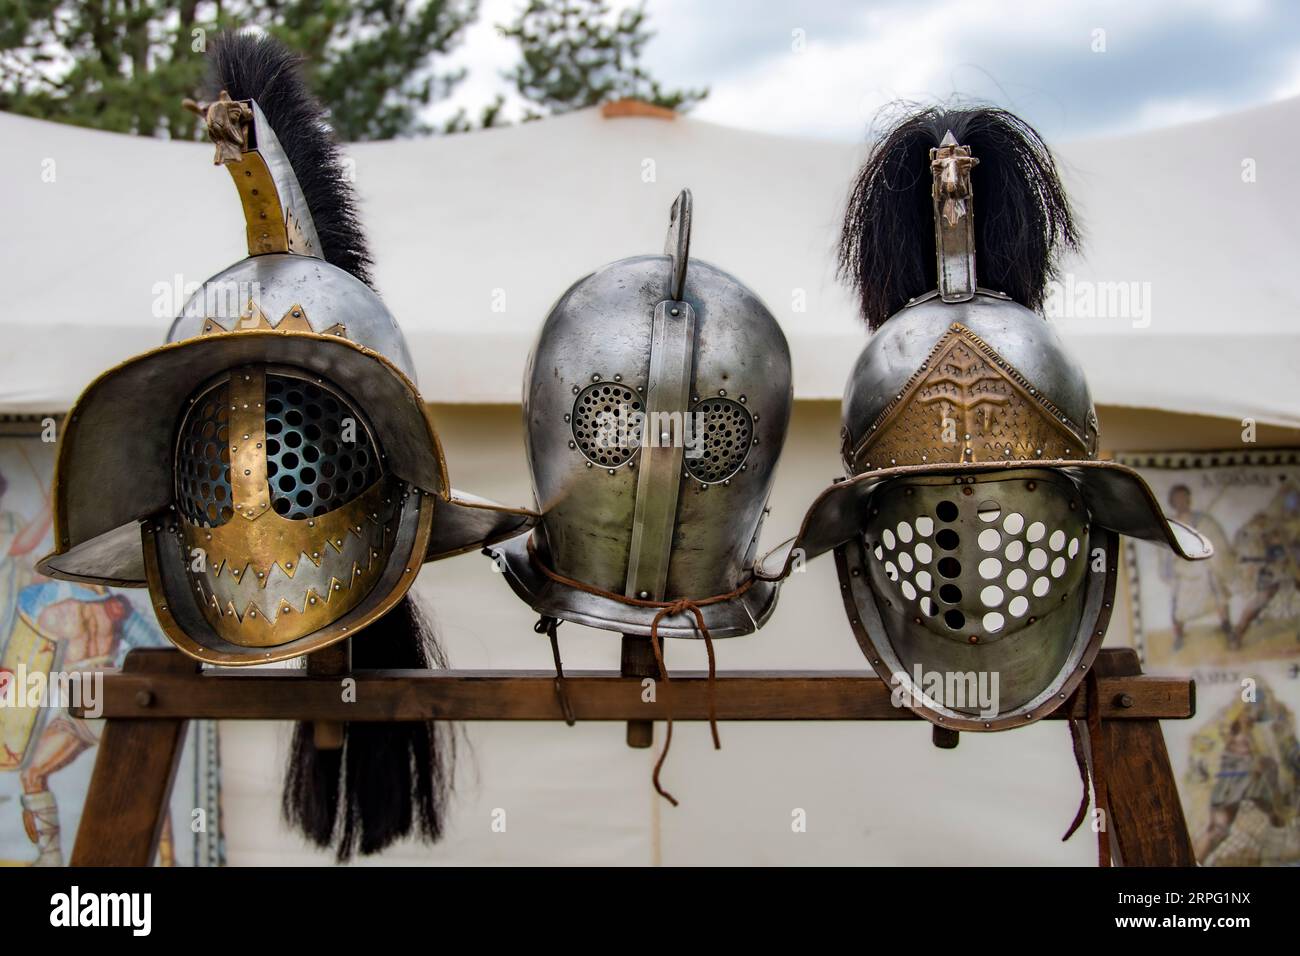 3 ancient roman gladiator helmets on a stand in front of a tent Stock Photo